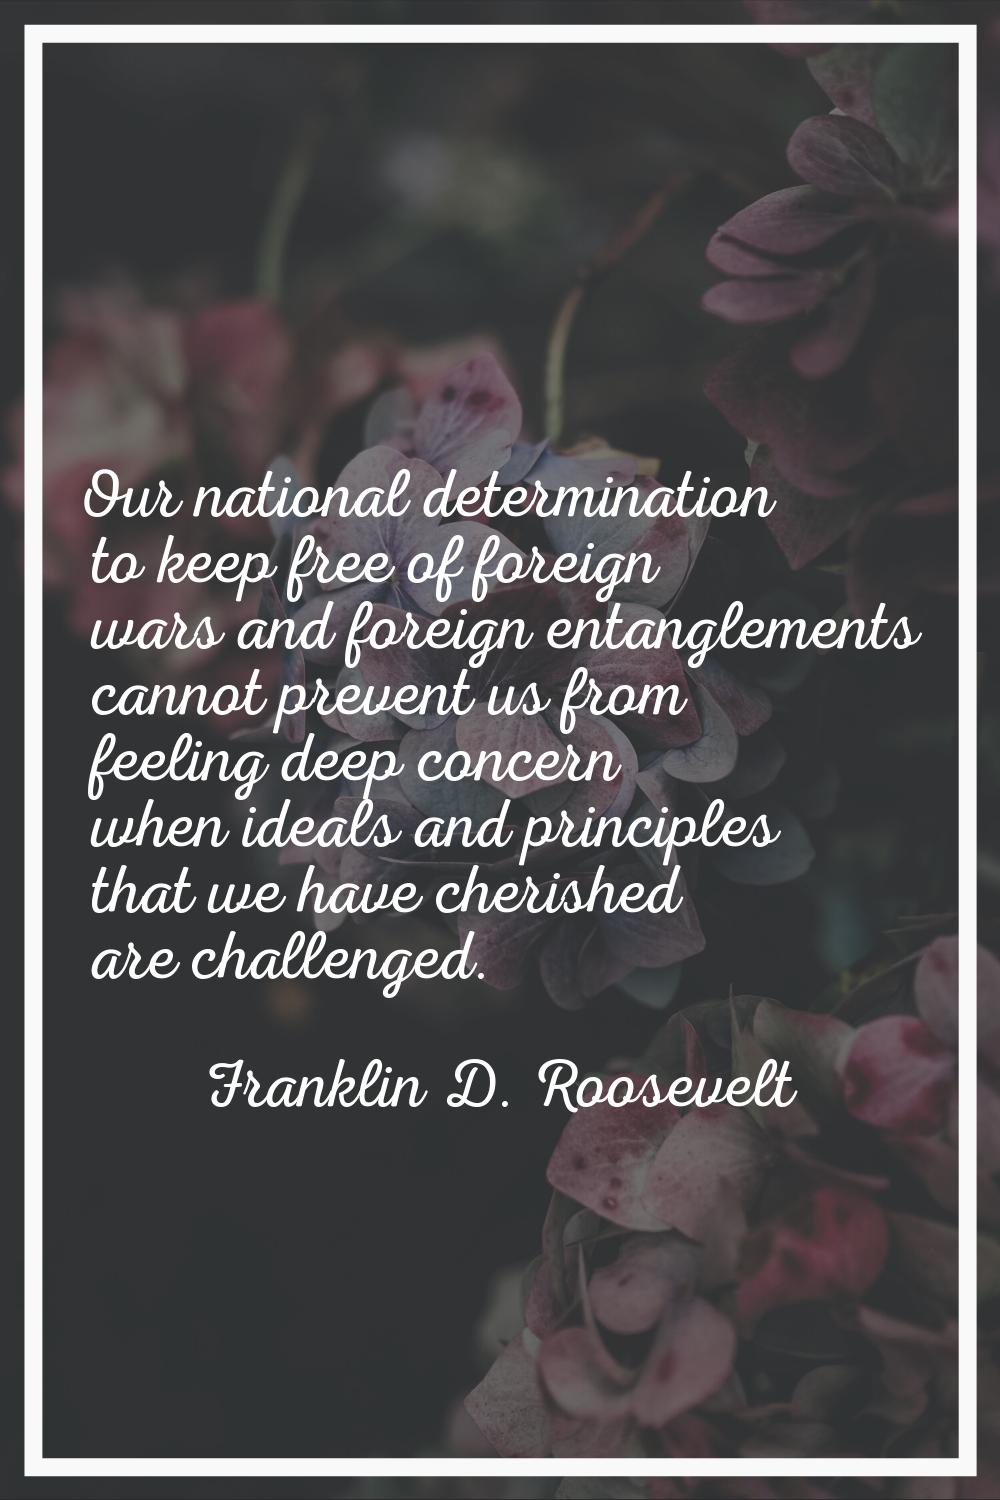 Our national determination to keep free of foreign wars and foreign entanglements cannot prevent us